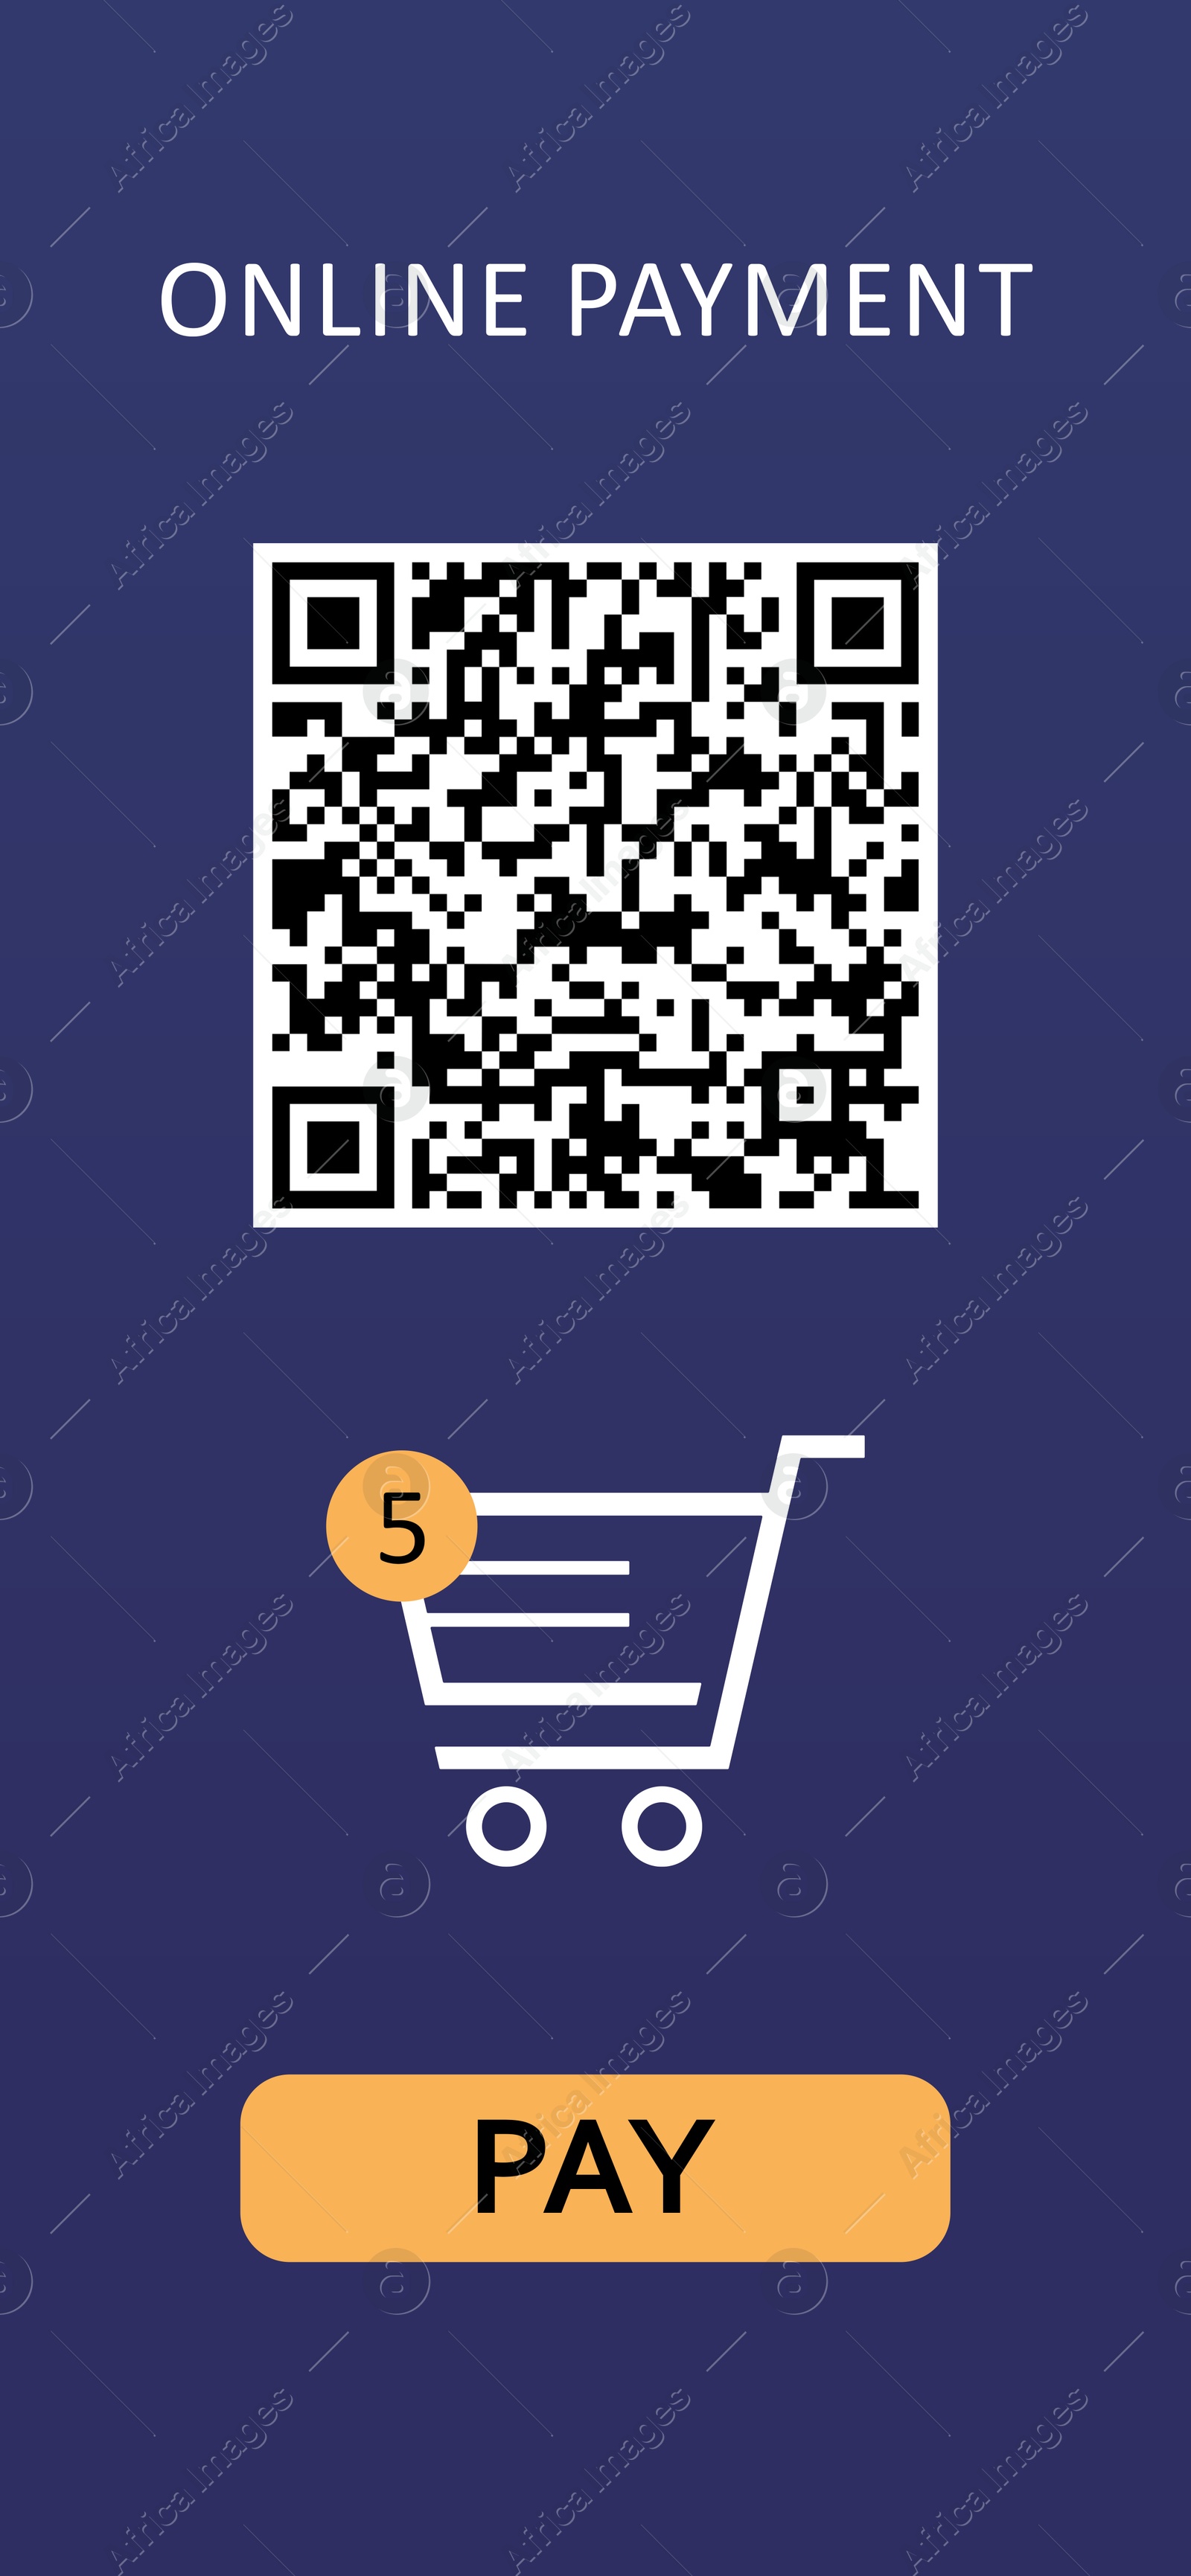 Image of Online payment application screen showing QR code, shopping card and Pay button on blue background, illustration